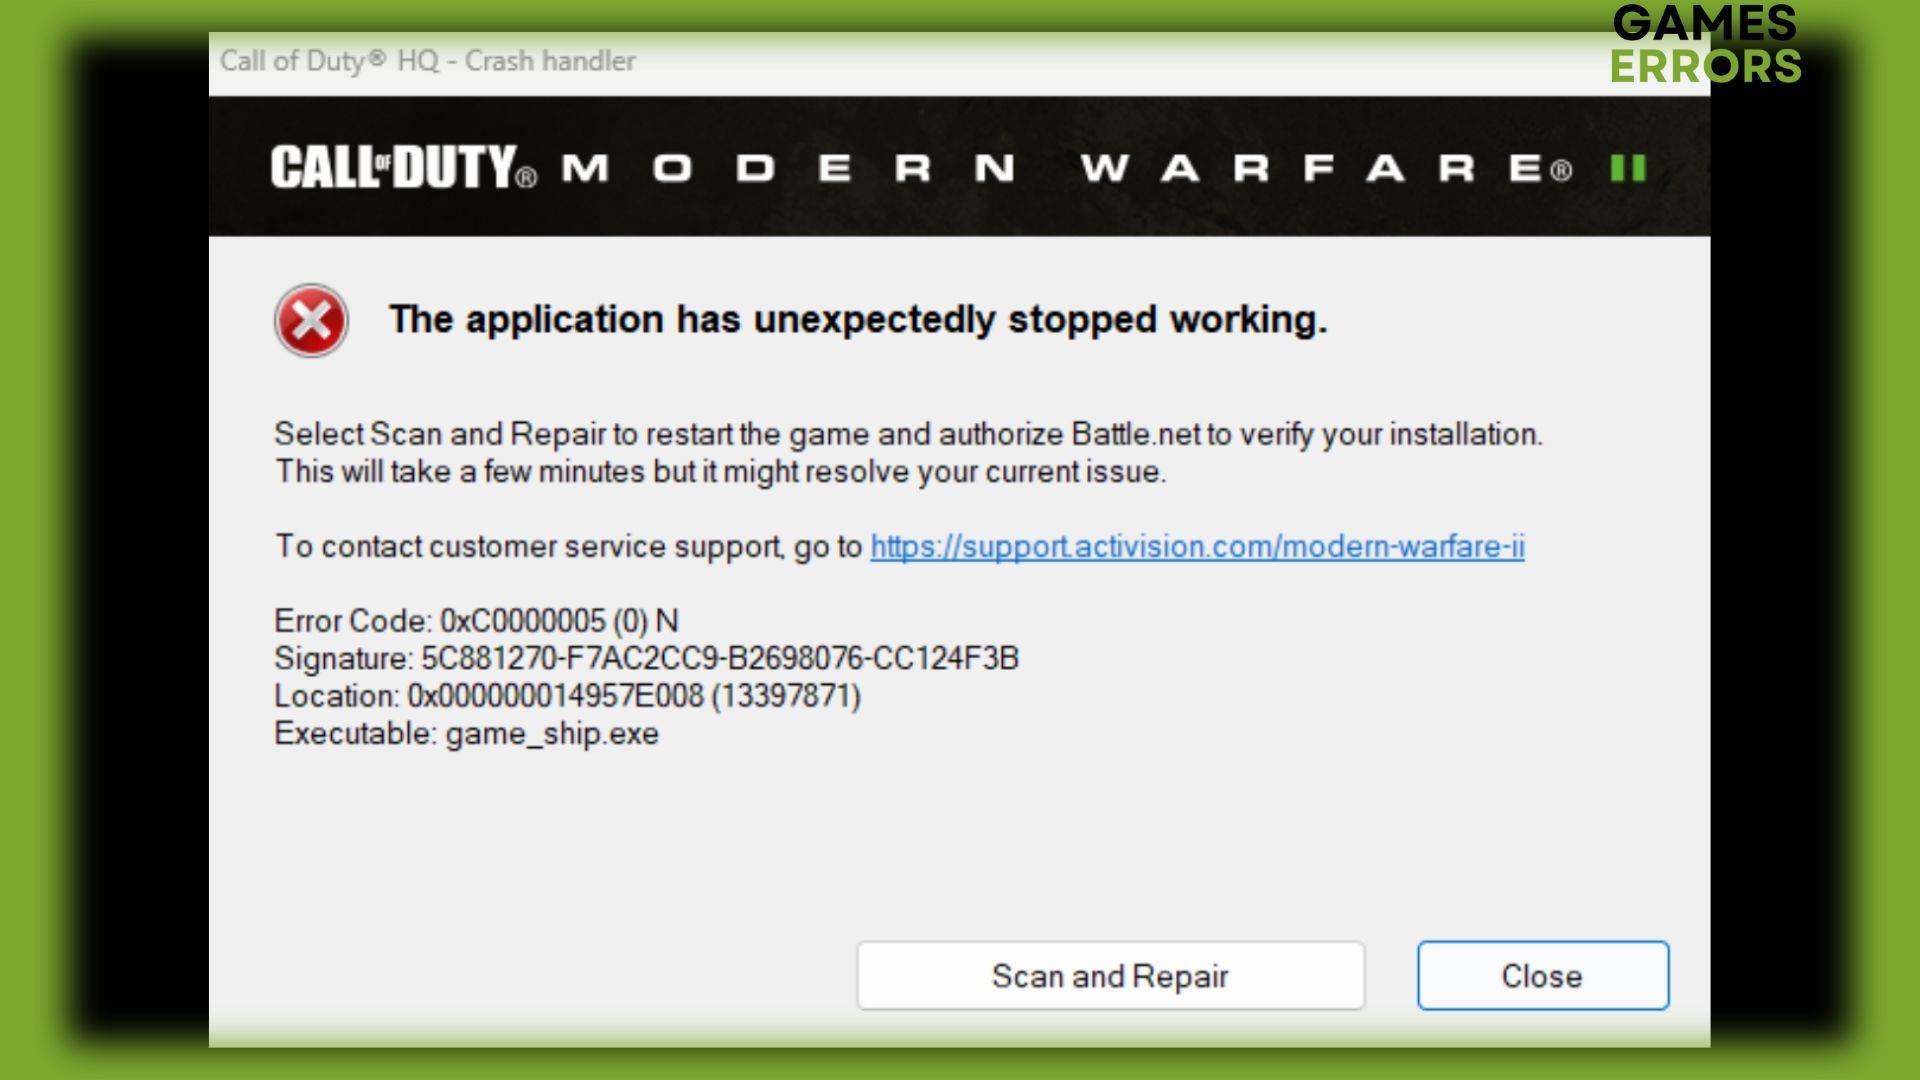 Game_ship.exe crash removal tool: A software specifically designed to fix the game_ship.exe crash error in MW2.
Scan for malware: Use a reliable antivirus program to scan your system for any malware or viruses that may be causing the crash.